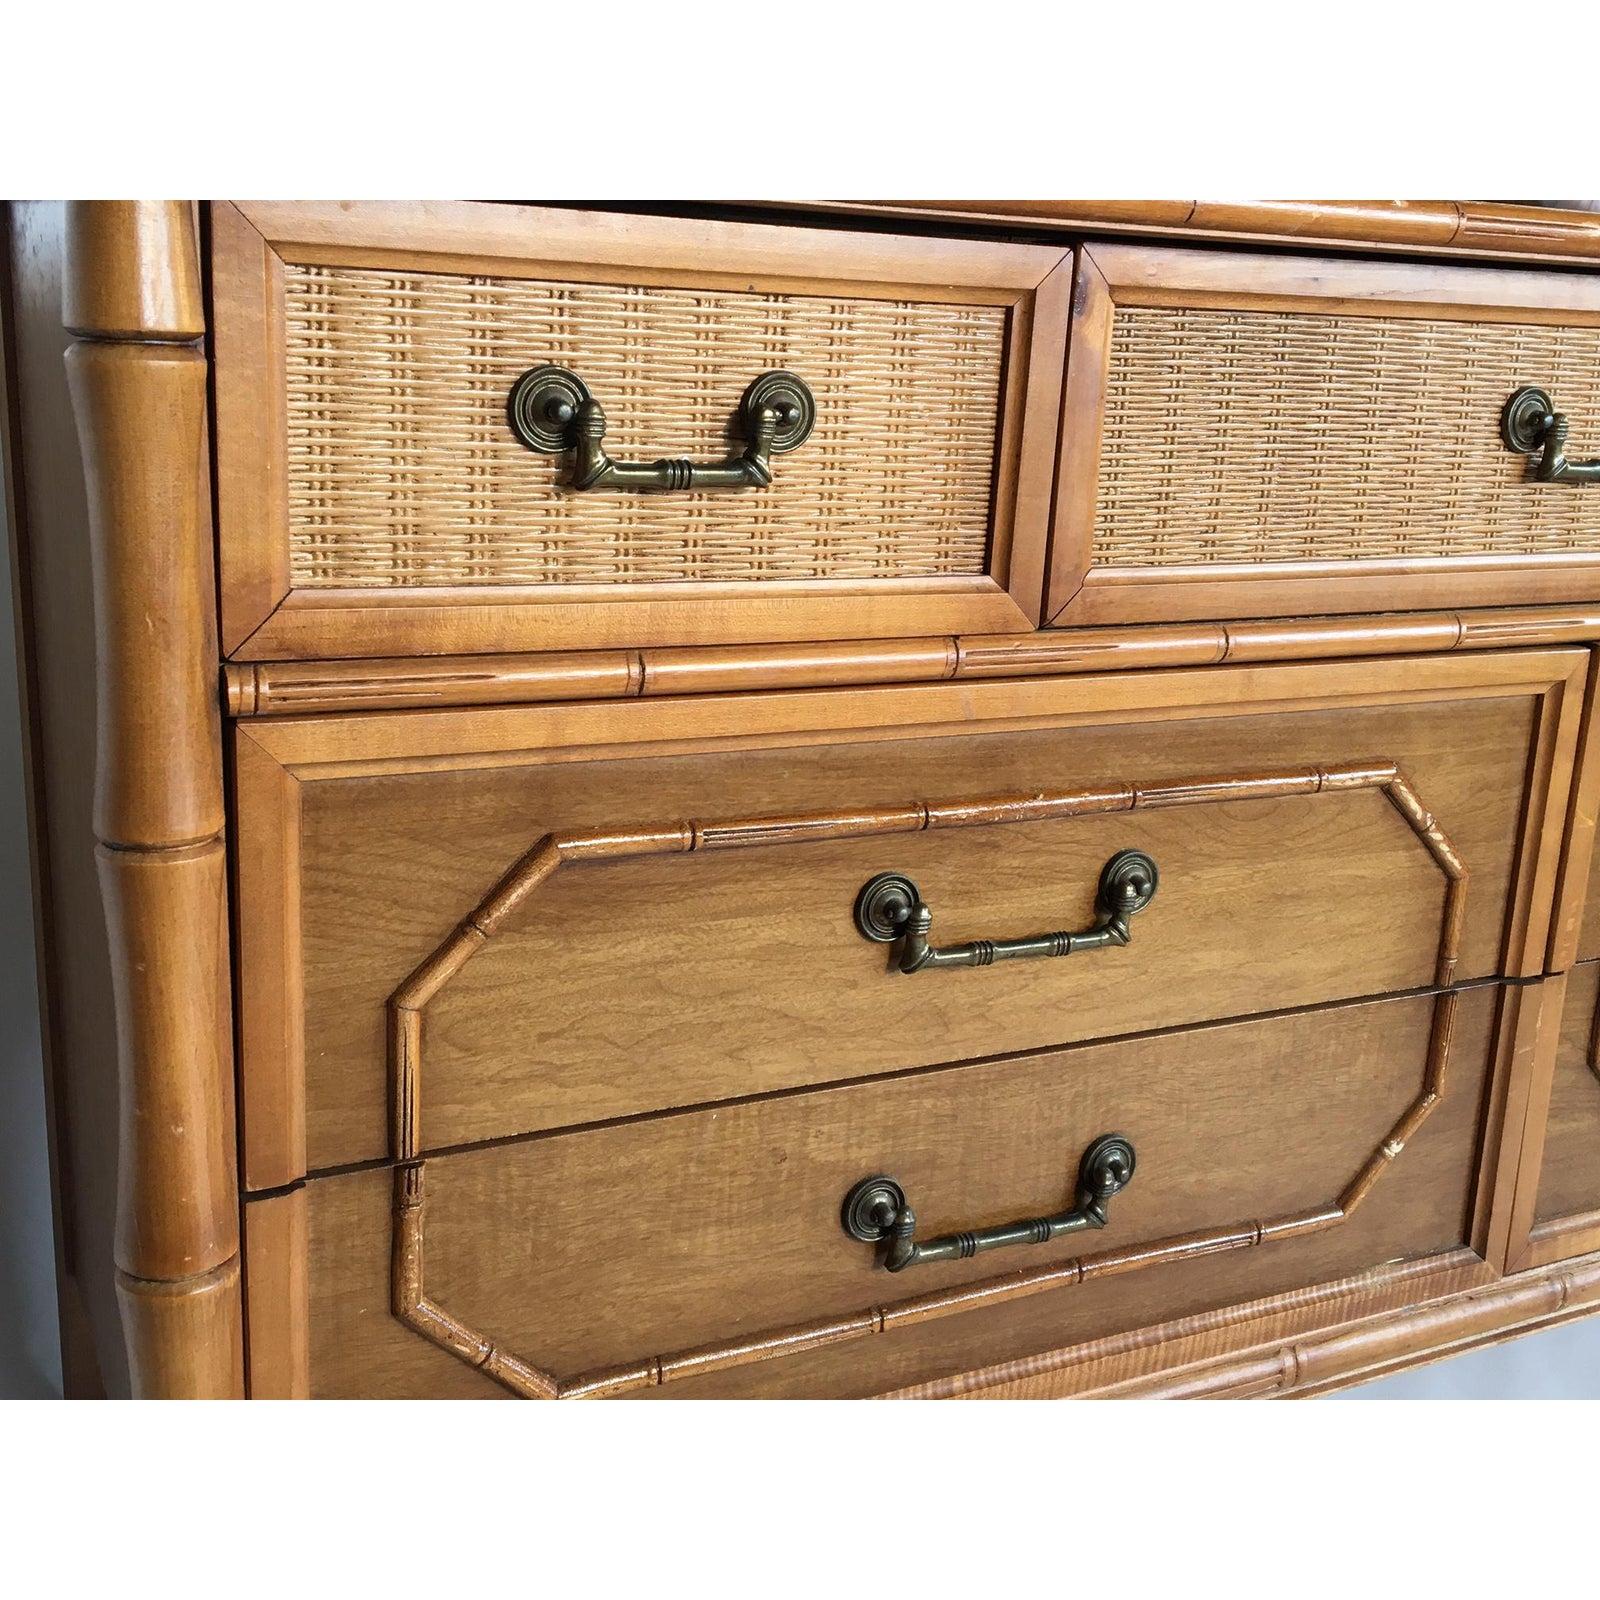 Beautifully crafted Broyhill dresser features bamboo styling and a cane detail inset along top front drawers.
Very good vintage condition with minor abrasions consistent with age. Aged brass drawer pulls and hardware.
Dovetail jointed drawers with